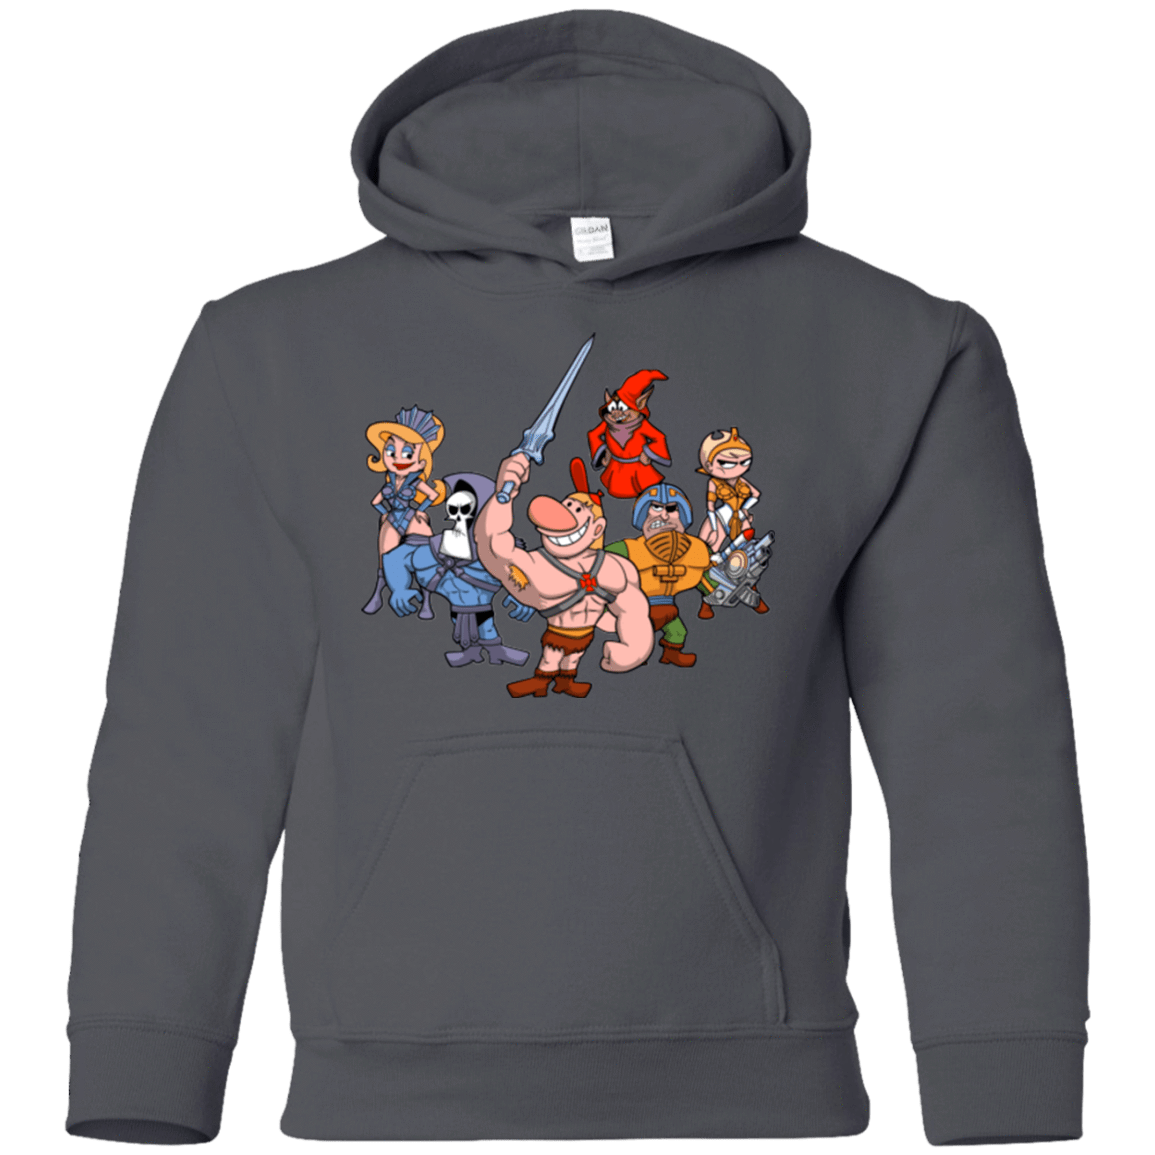 Sweatshirts Charcoal / YS Masters of the Grimverse Youth Hoodie